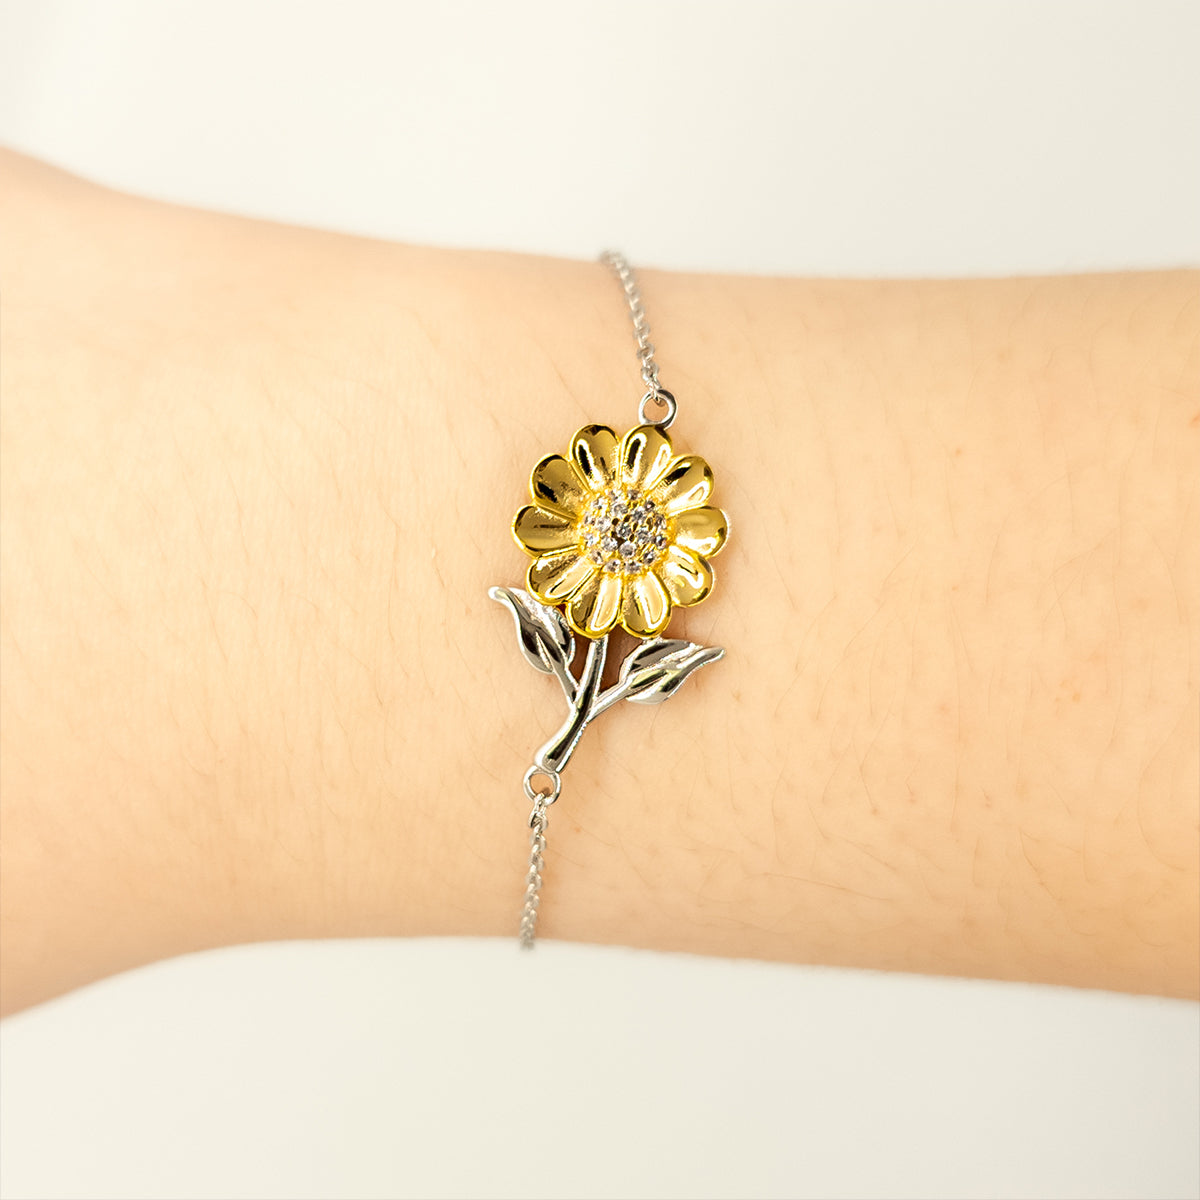 Funny Physician Mom Gifts, The best kind of MOM raises Physician, Birthday, Mother's Day, Cute Sunflower Bracelet for Physician Mom